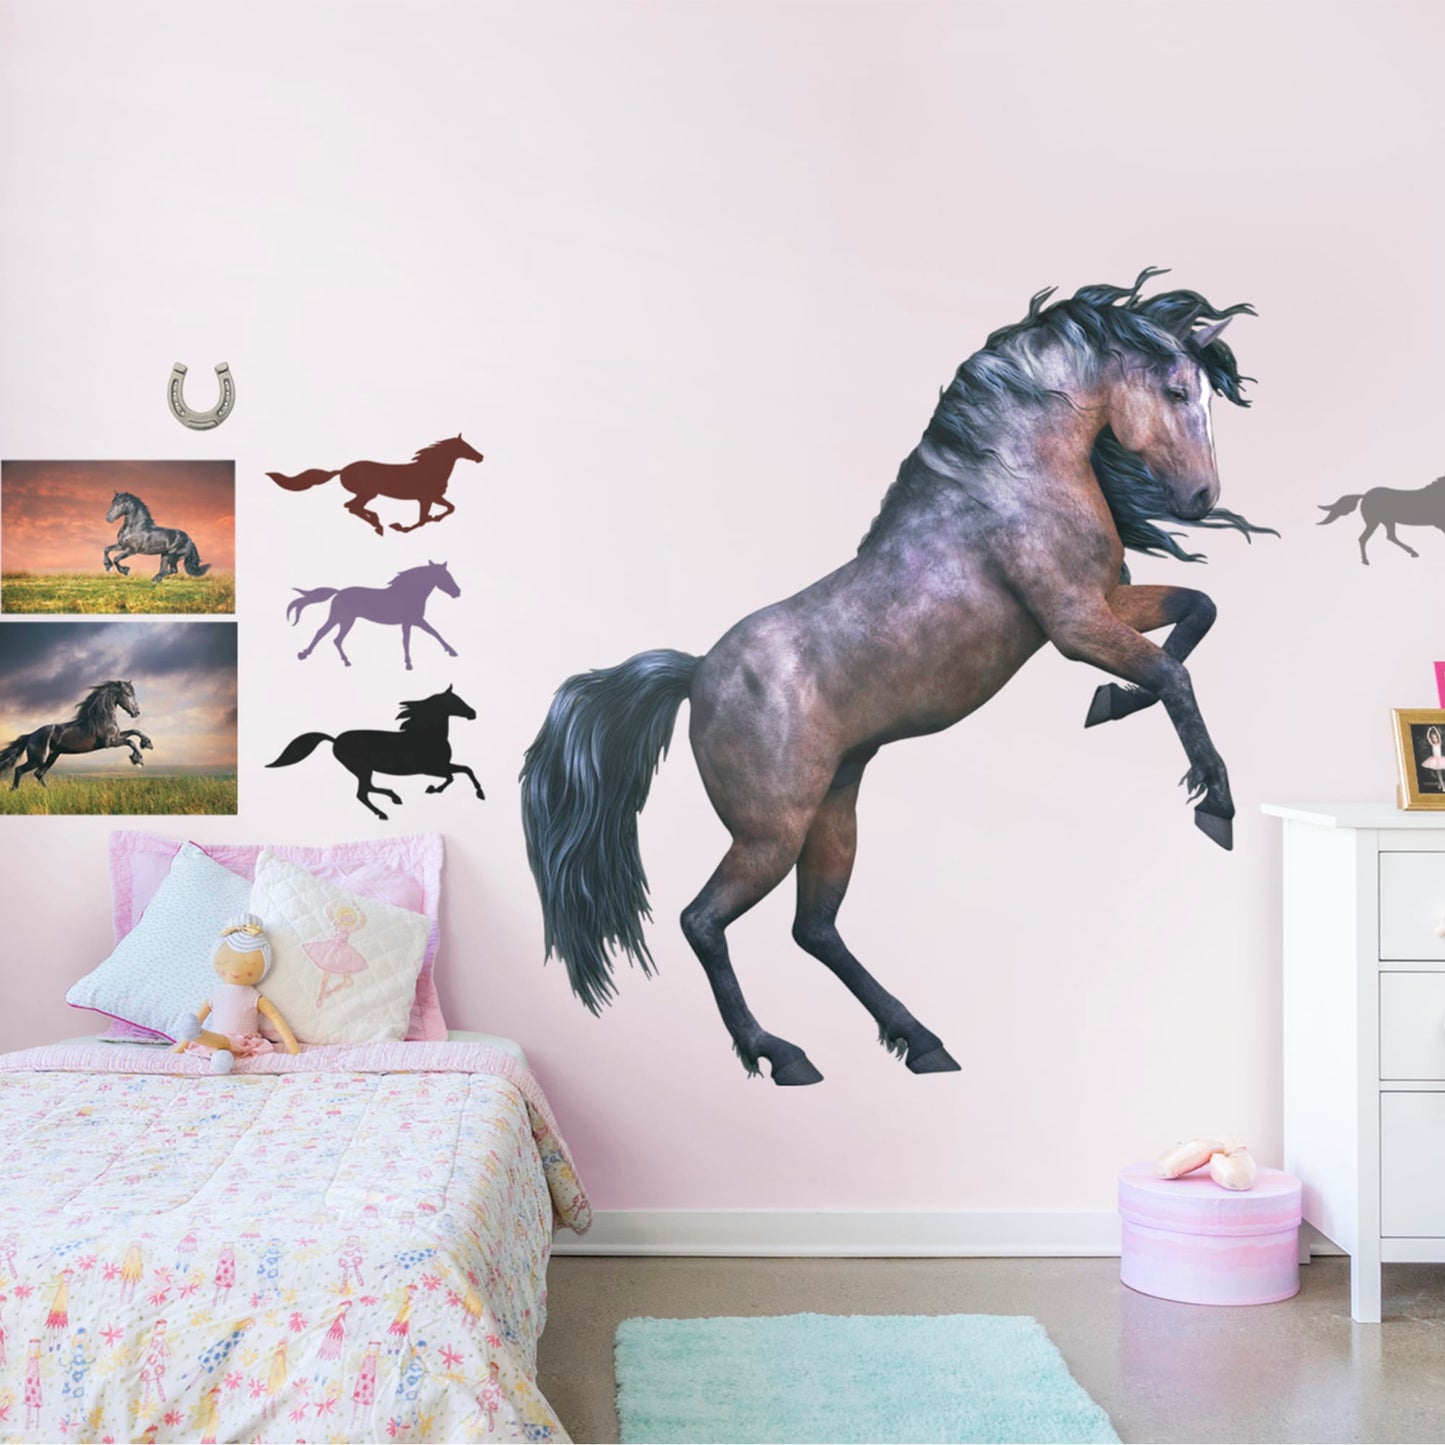 Giant Animal + 2 Decals (45"W x 39"H)